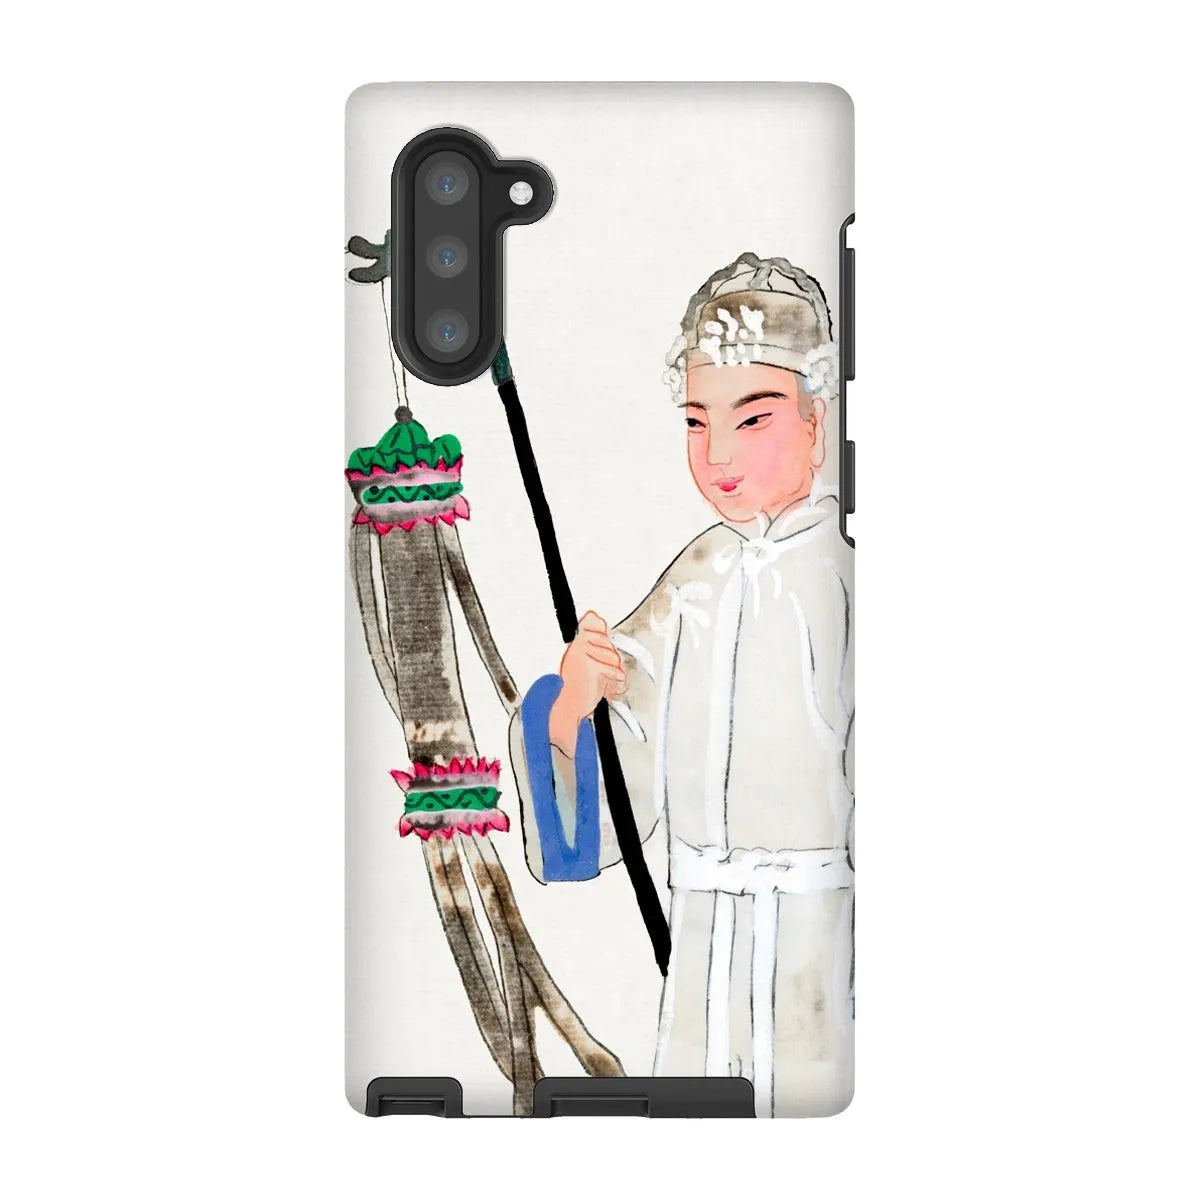 Man In Mourning - Chinese Historical Art Phone Case - Samsung Galaxy Note 10 / Matte - Mobile Phone Cases - Aesthetic